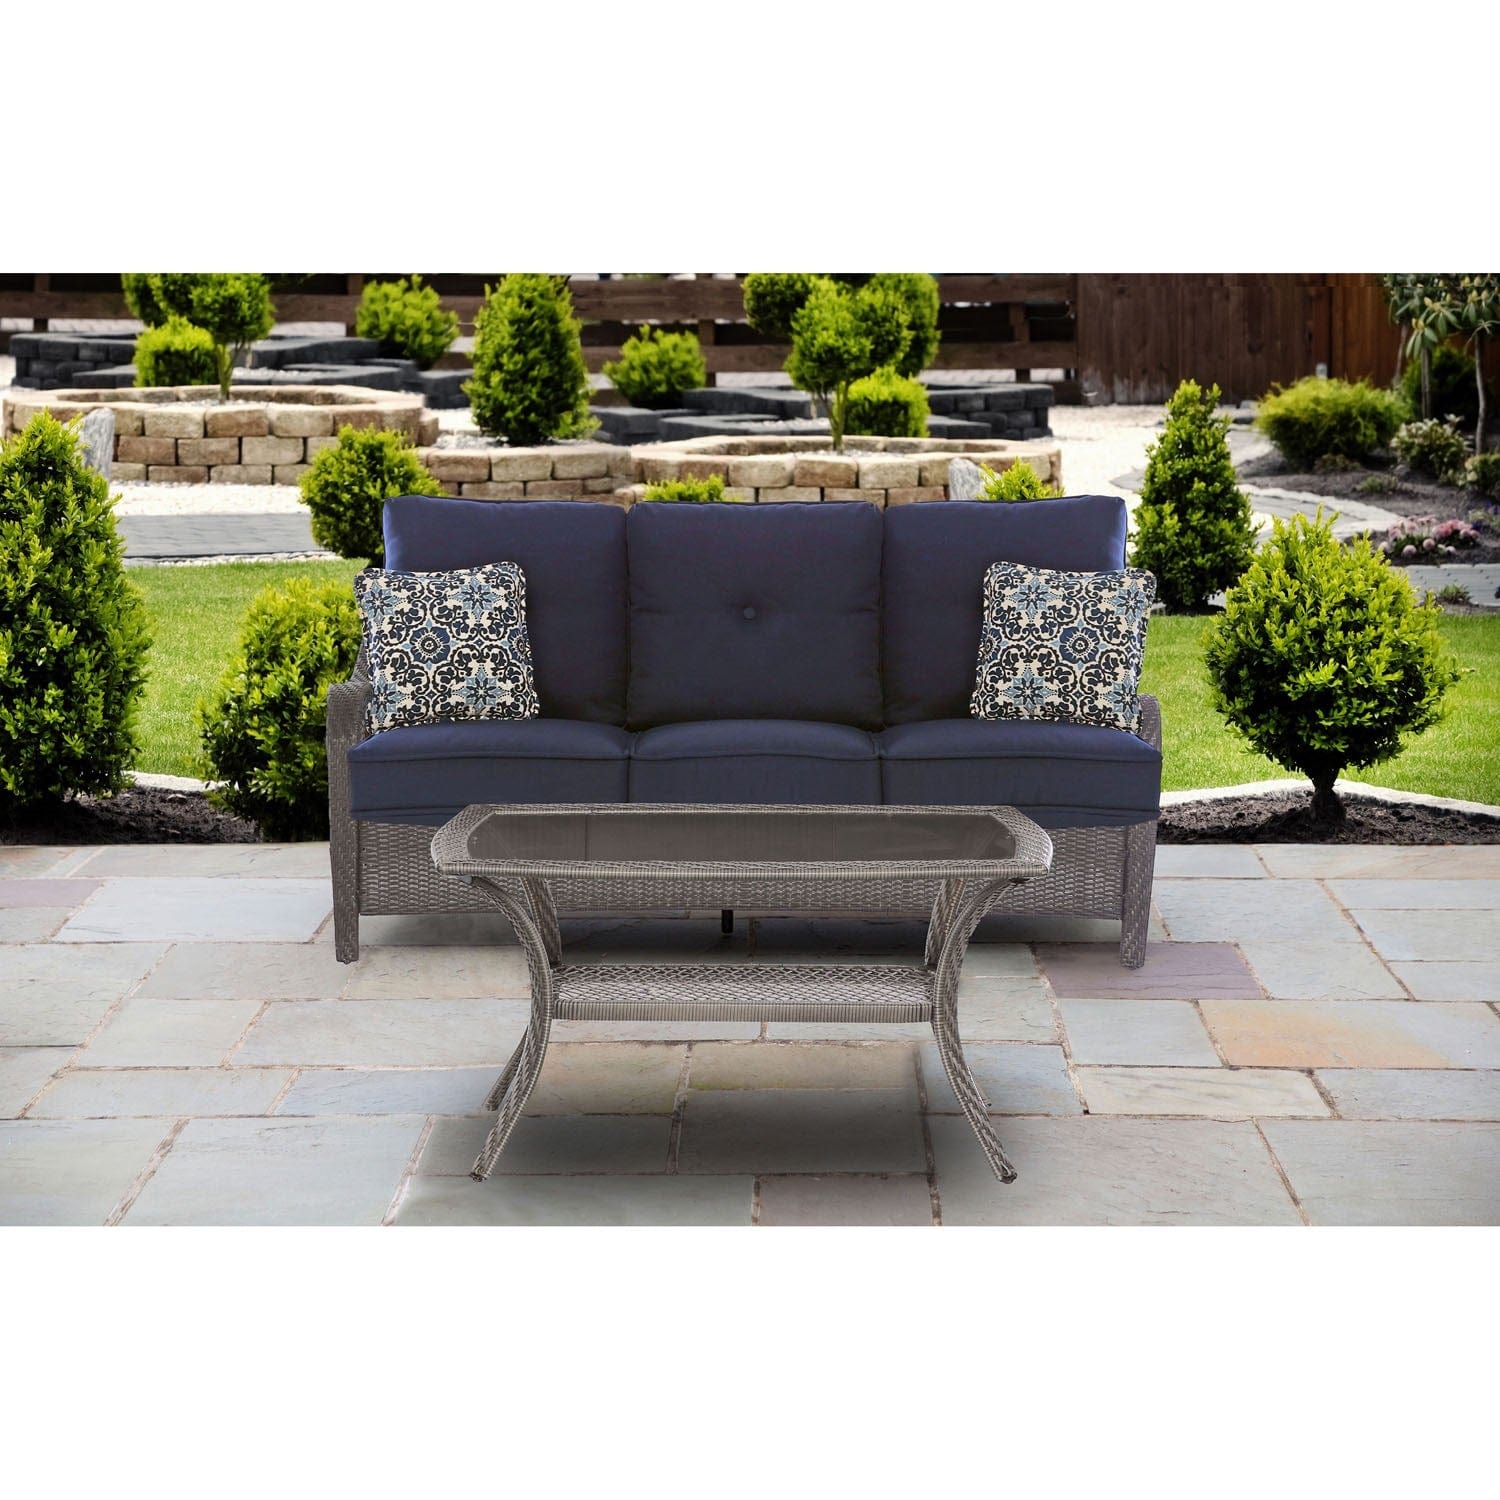 Hanover Conversation Set Hanover Orleans 2-Piece Patio Set in Navy Blue with Gray Weave